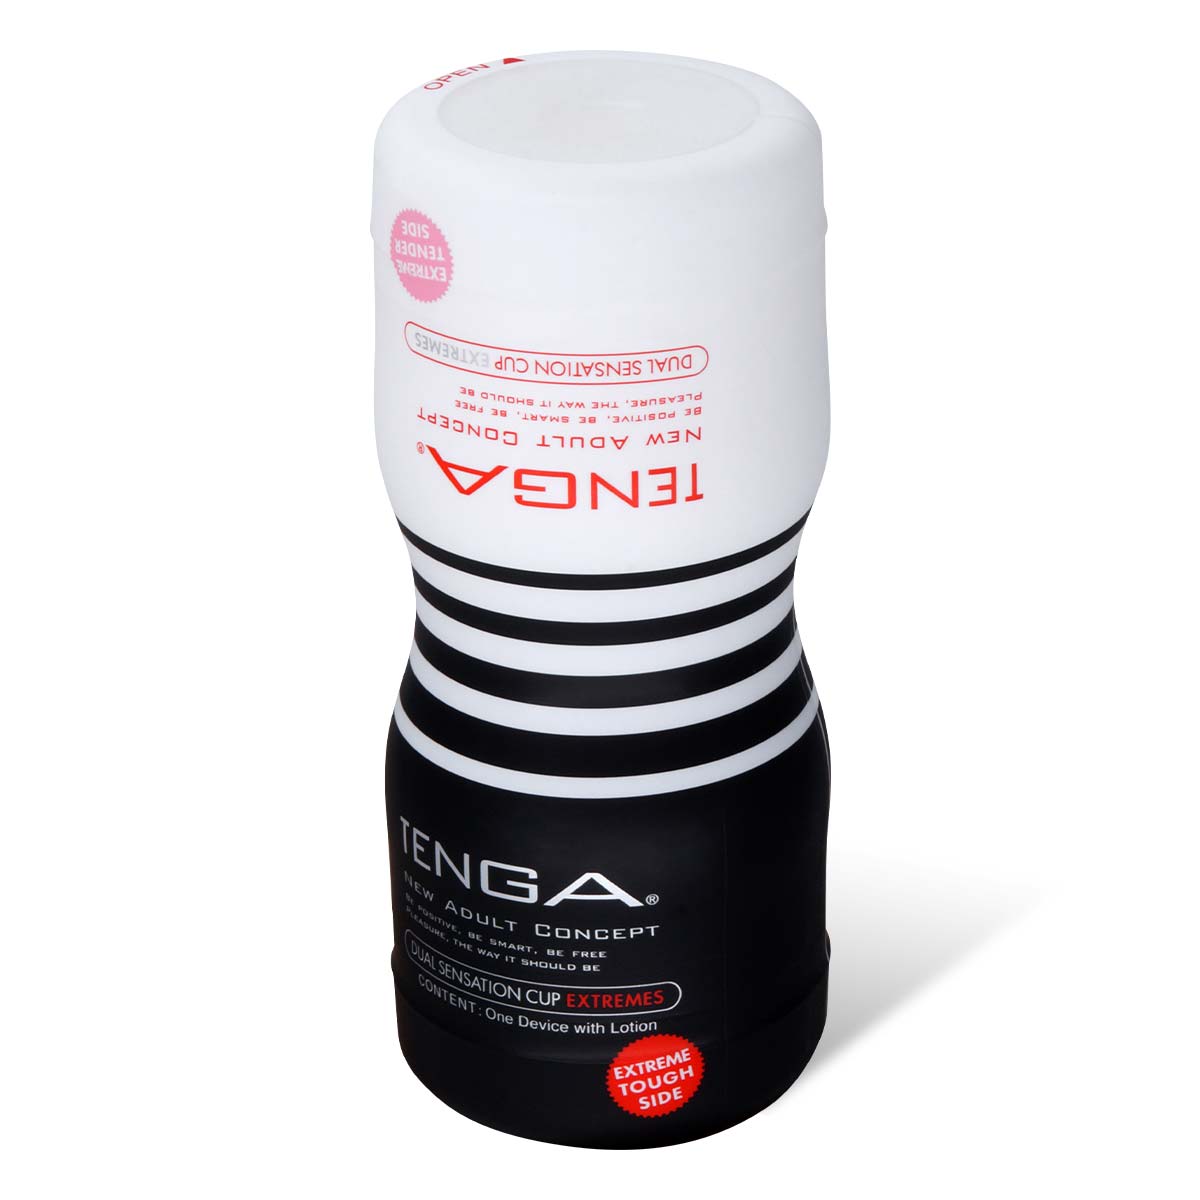 TENGA DUAL FEEL CUP 2nd Generation EXTREMES-p_1